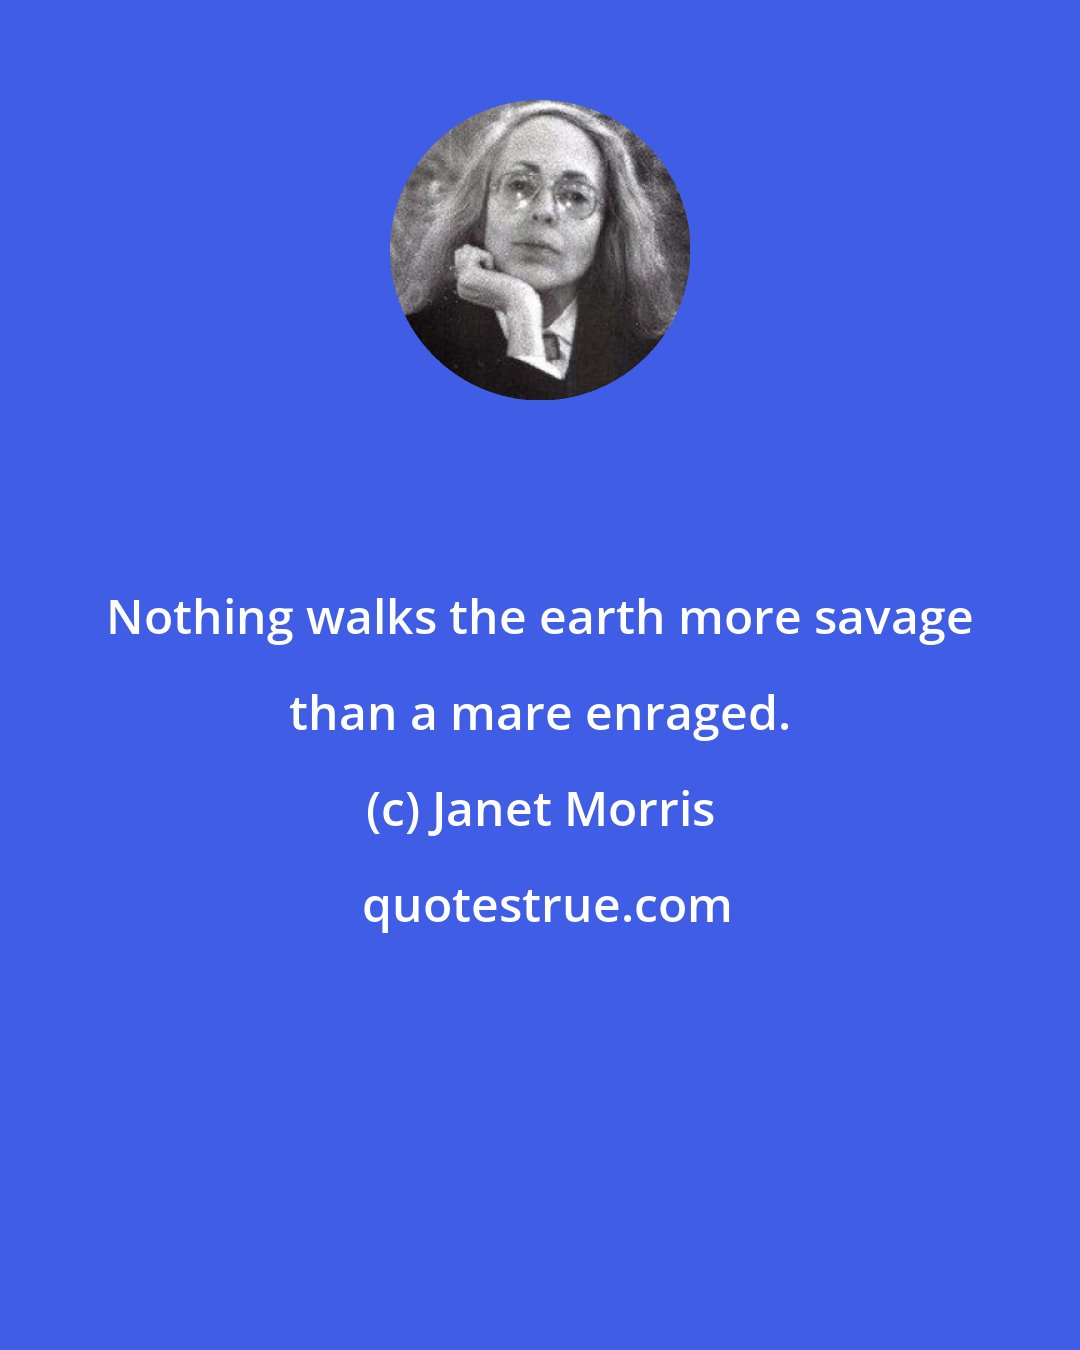 Janet Morris: Nothing walks the earth more savage than a mare enraged.